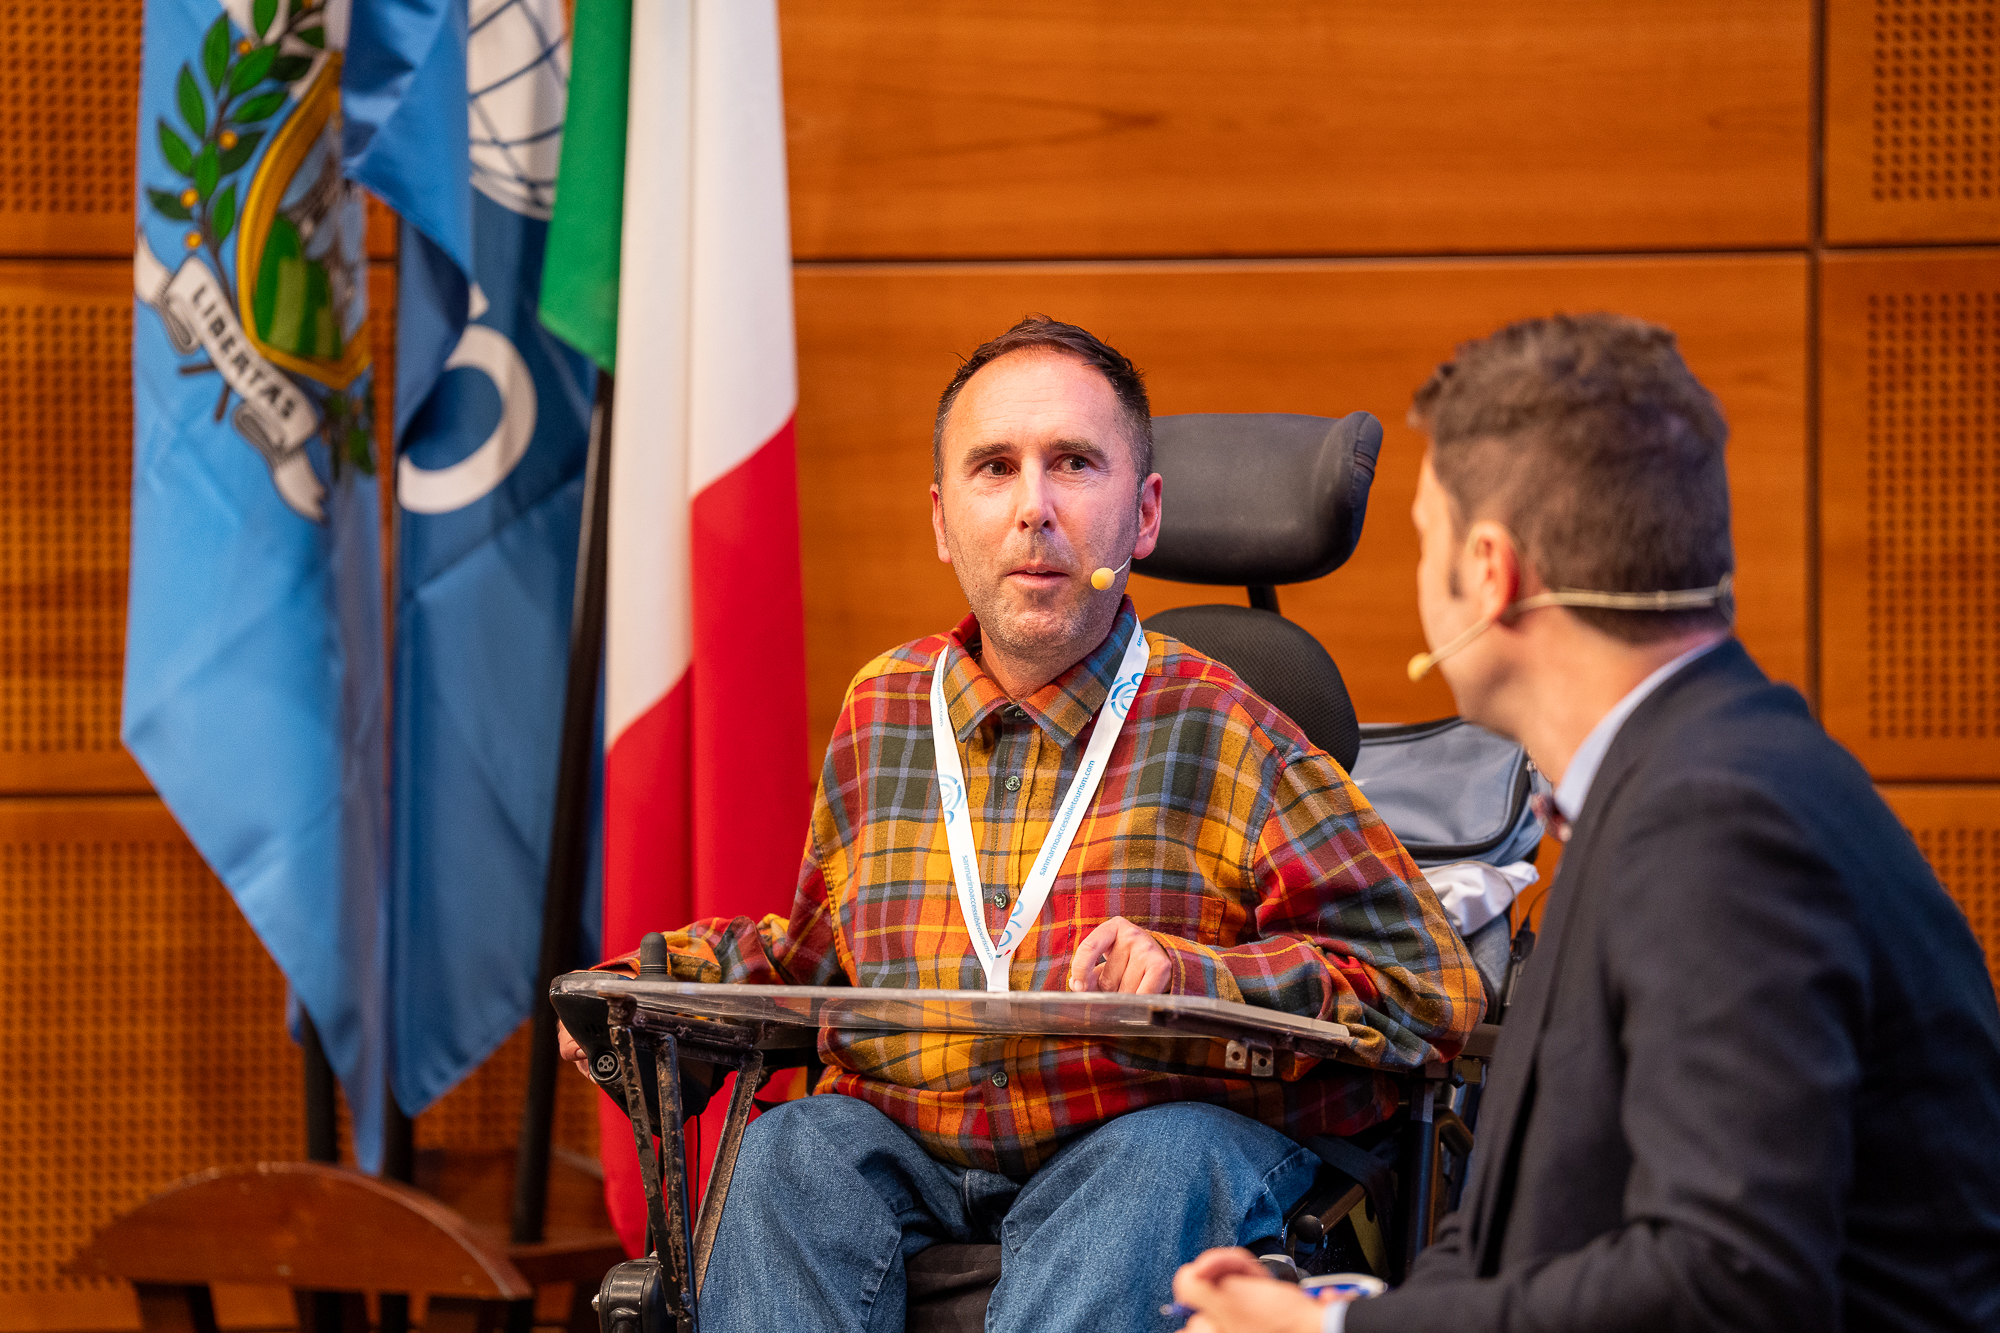 Martyn in his orange and red checked shirt with a microphone from his ear to mouth in his wheelchair talking on stage in San Marino 